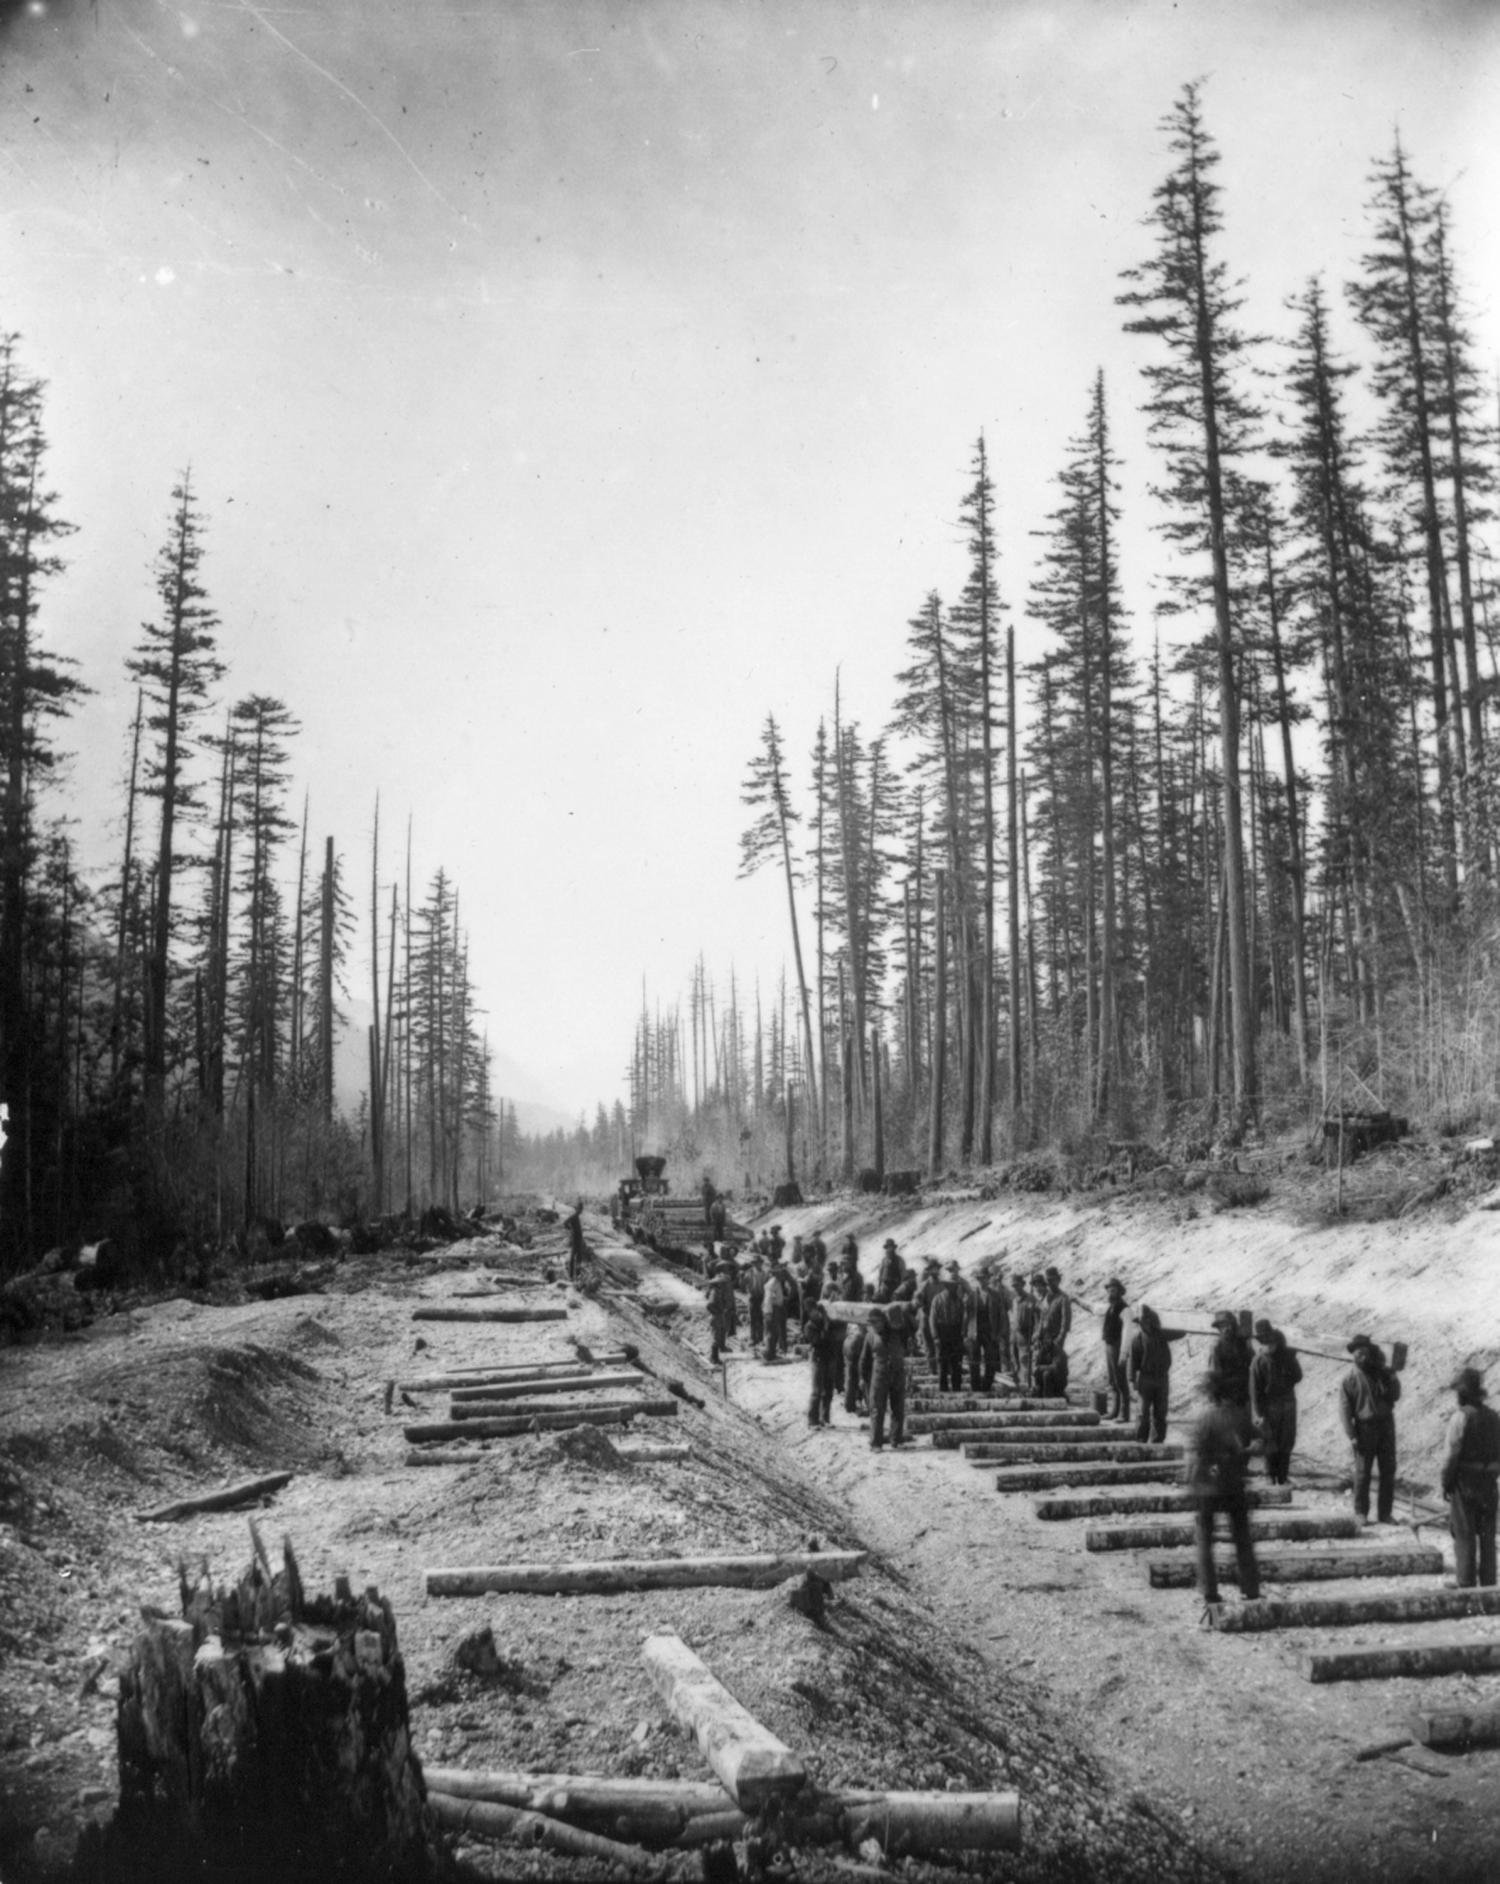 Workers building the CPR railway.